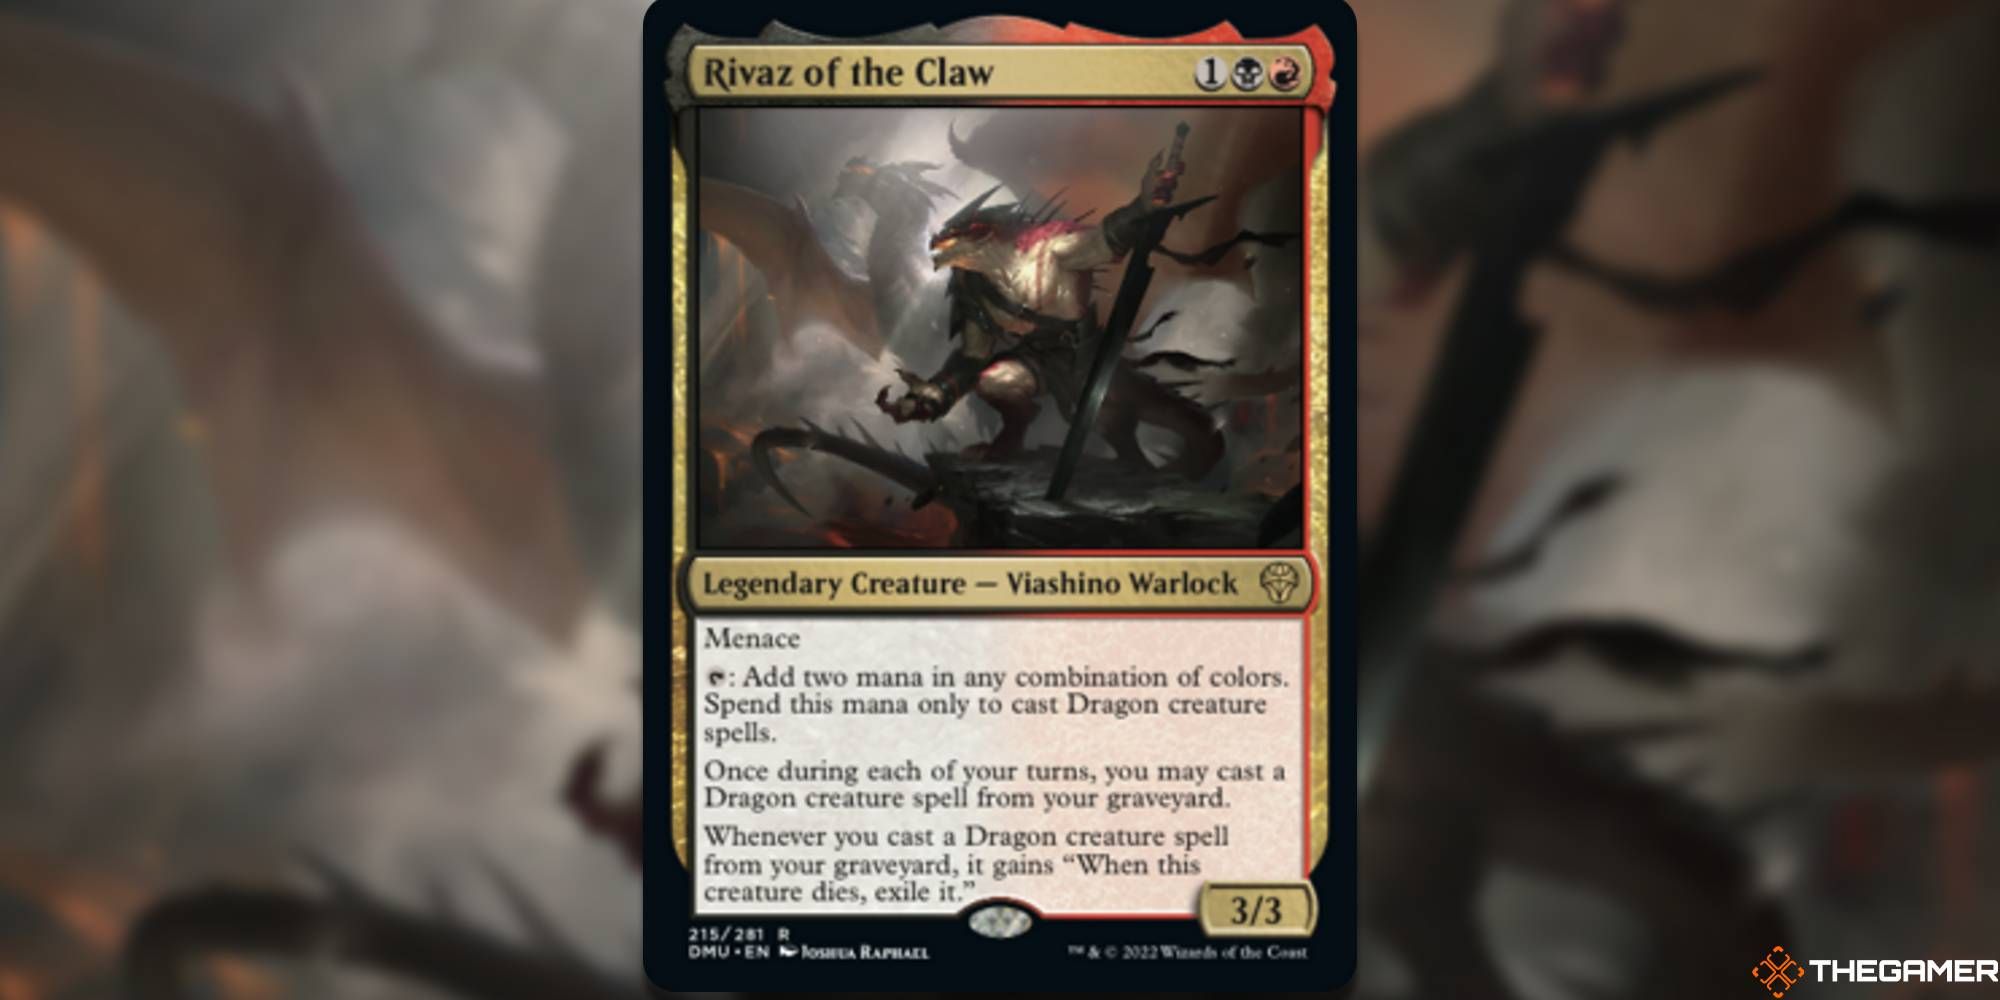 Rivaz of the Claw